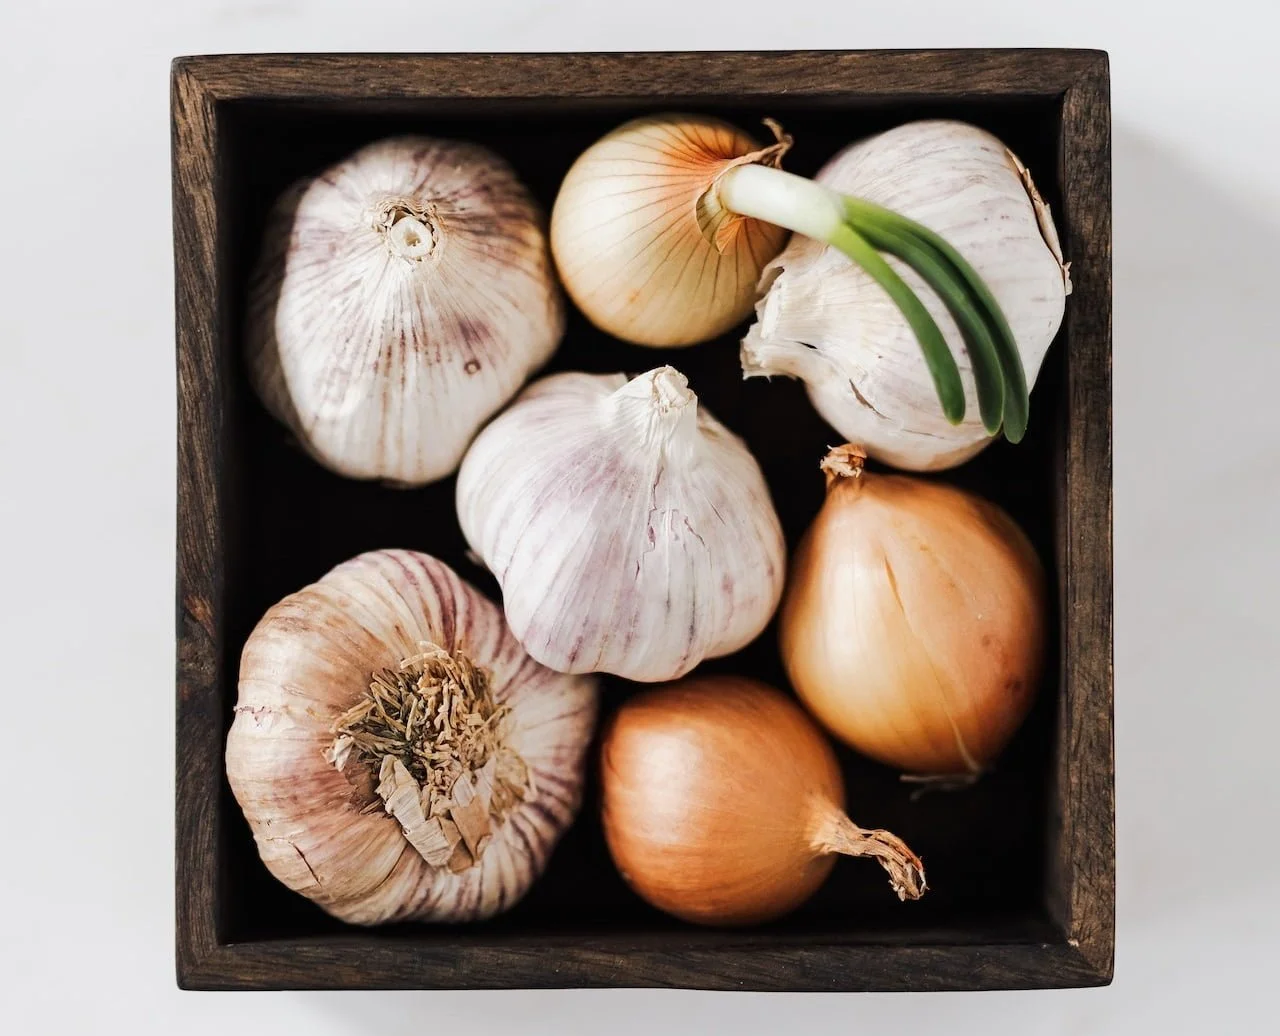 Storing Staples: Why Onions and Garlic Don’t Belong in the Fridge